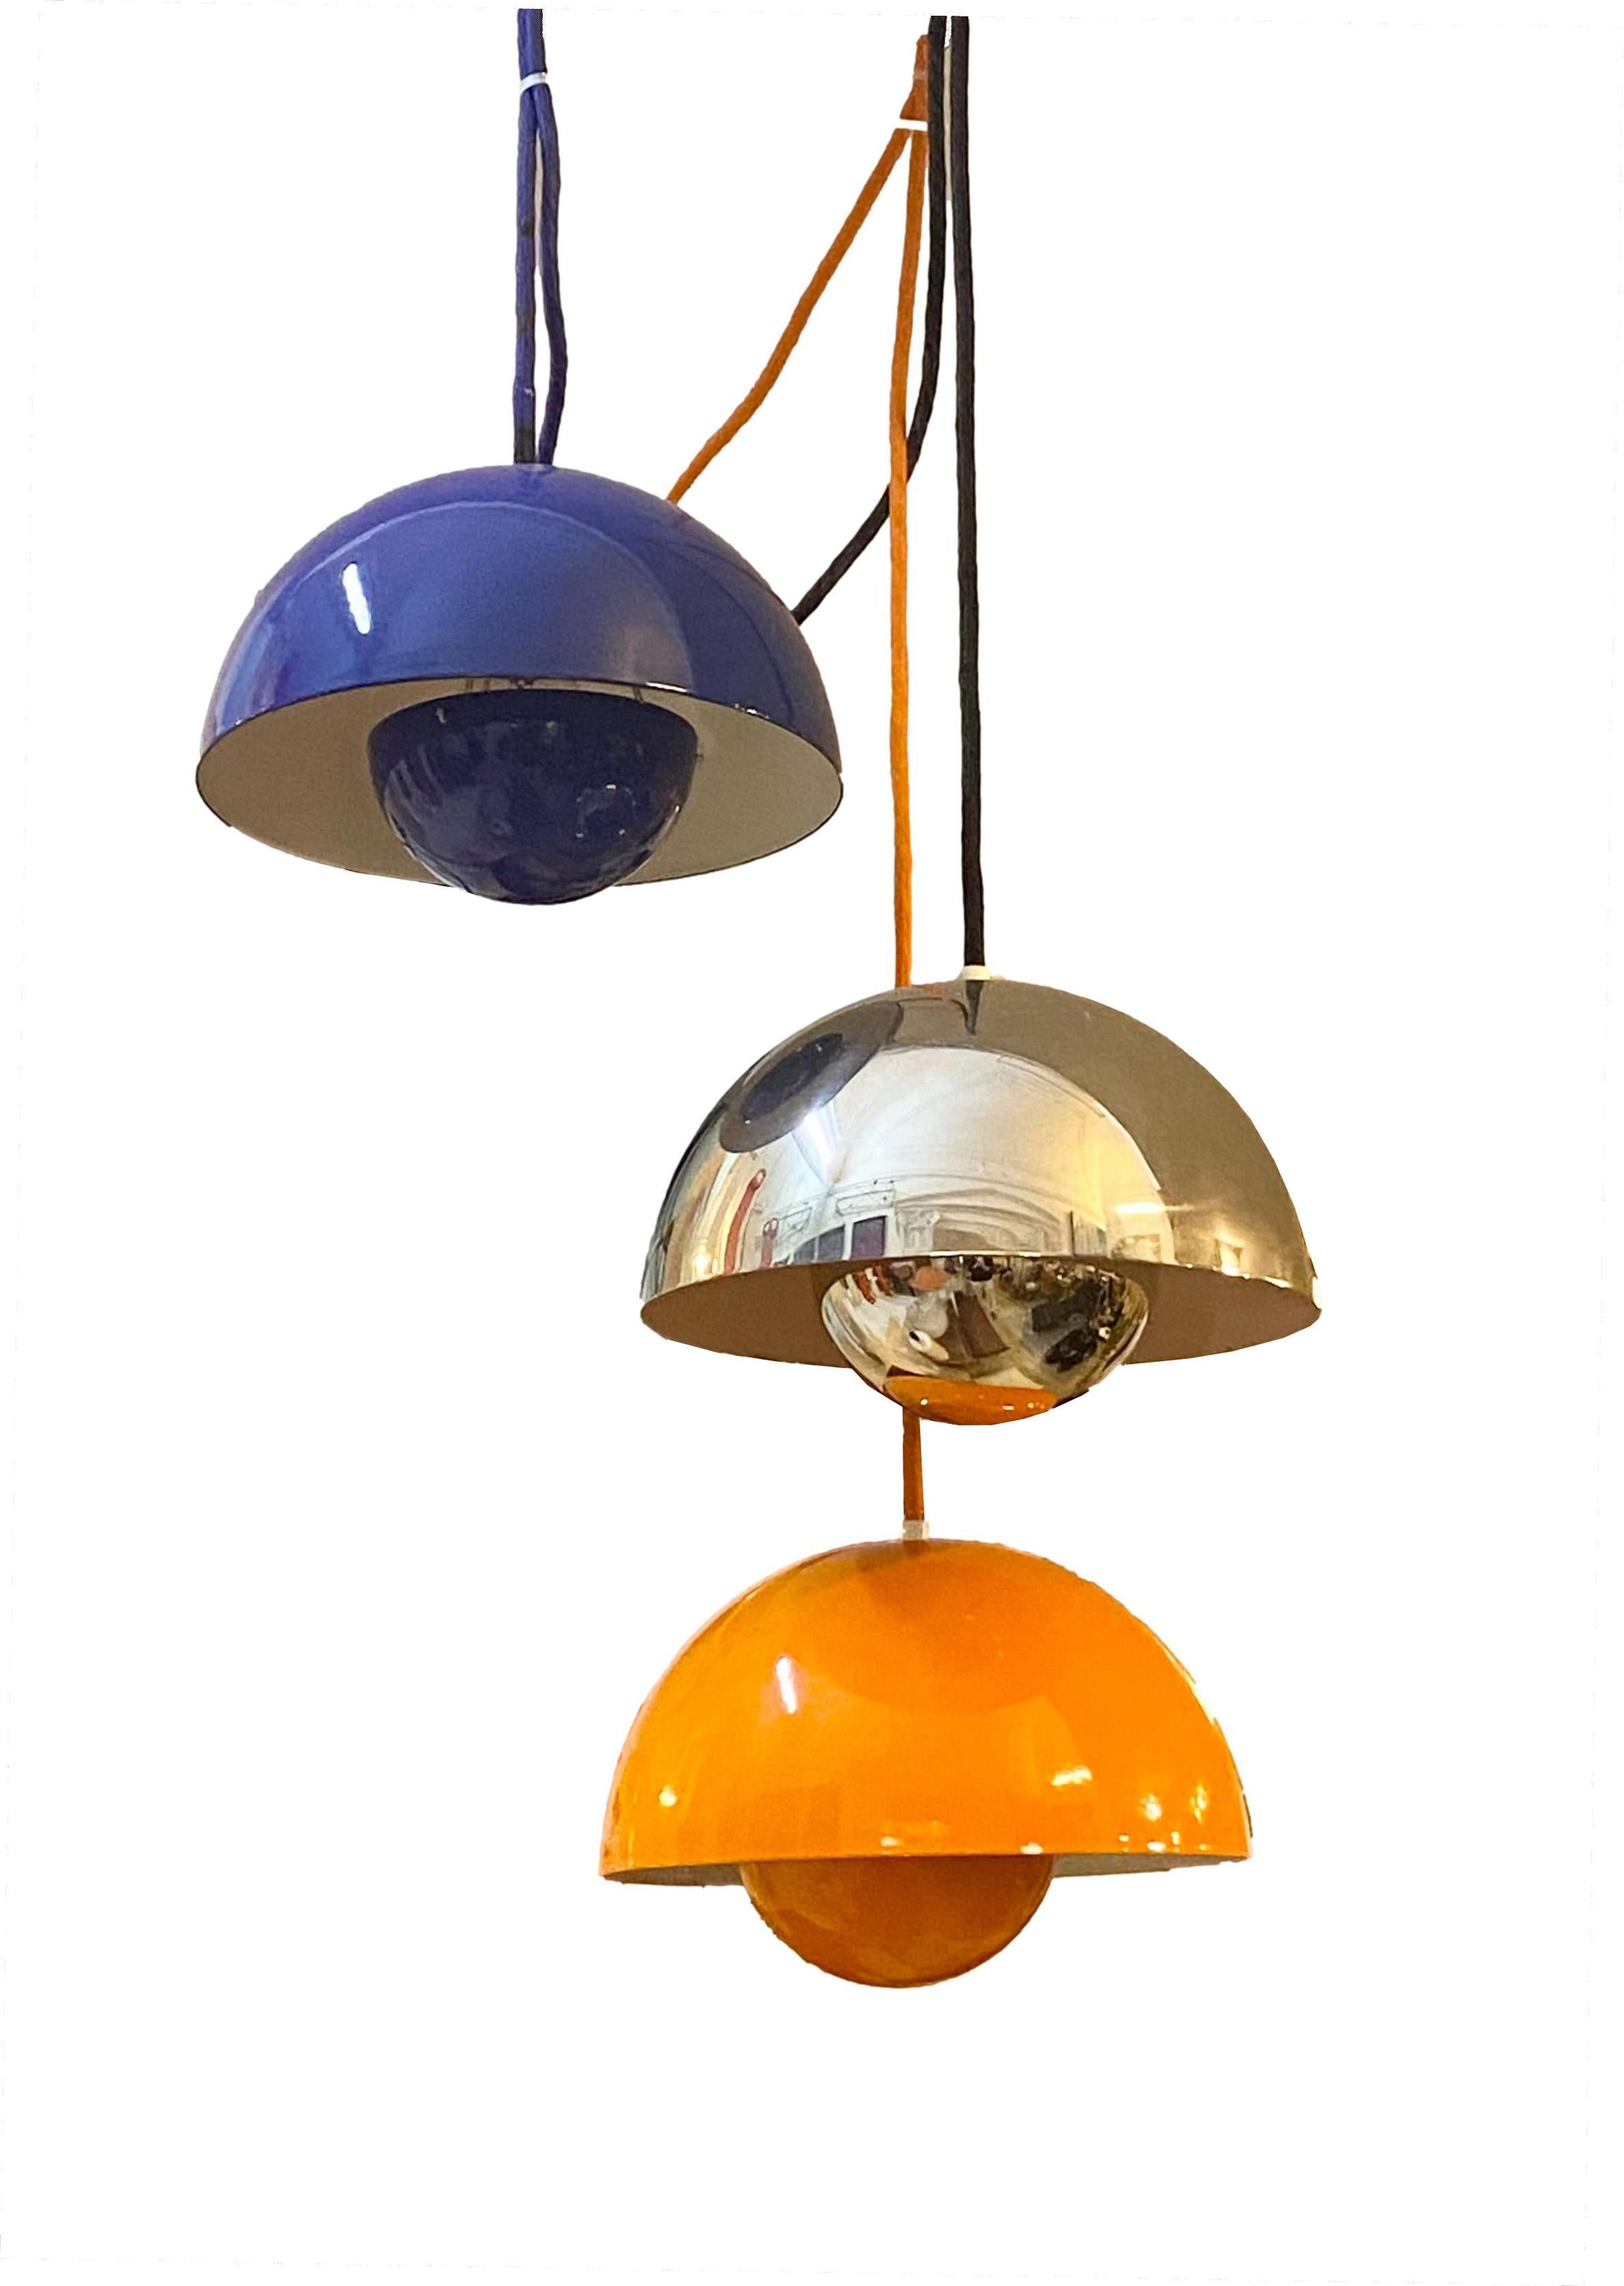 erner Panton flowerpot pendant light for Louis Poulsen, Denmark designed in 1969.

This pendant is an early example of the Panton flowerpot model and feature an orange enamel lampshade consisting of two semi-circular spheres facing each other. The